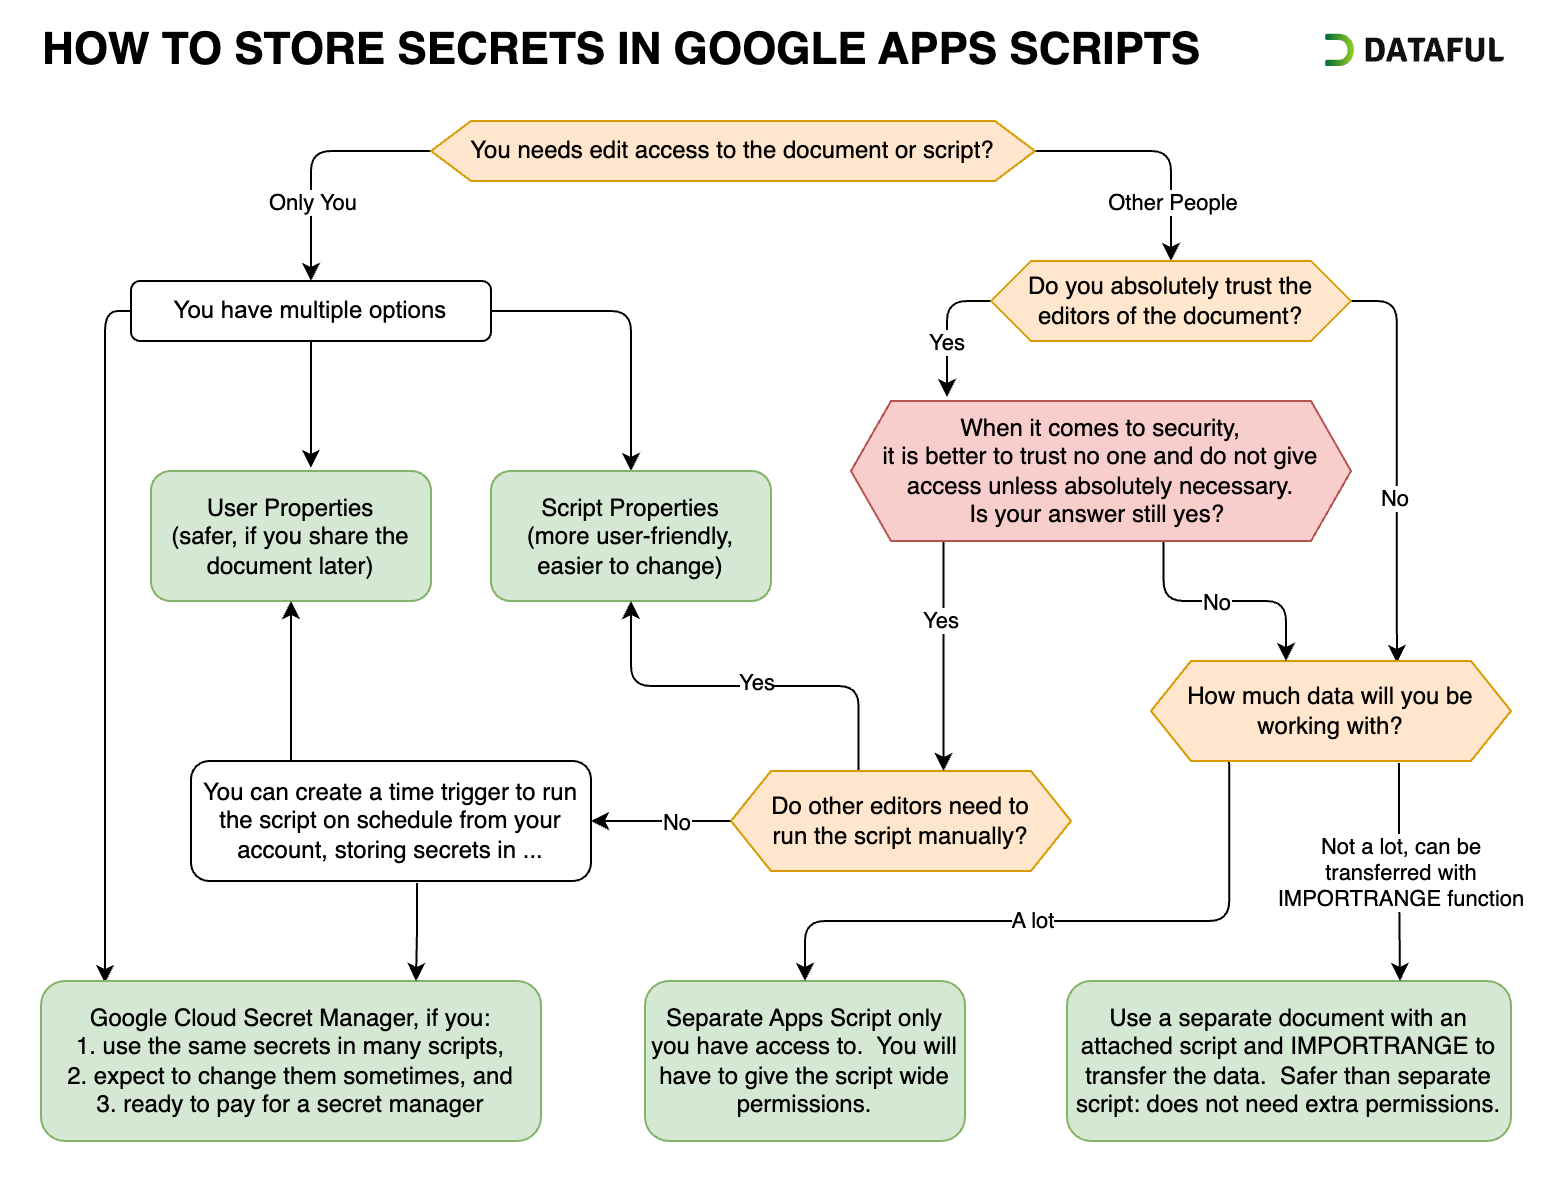 How to decide which method to use to store secrets in Google Apps Script